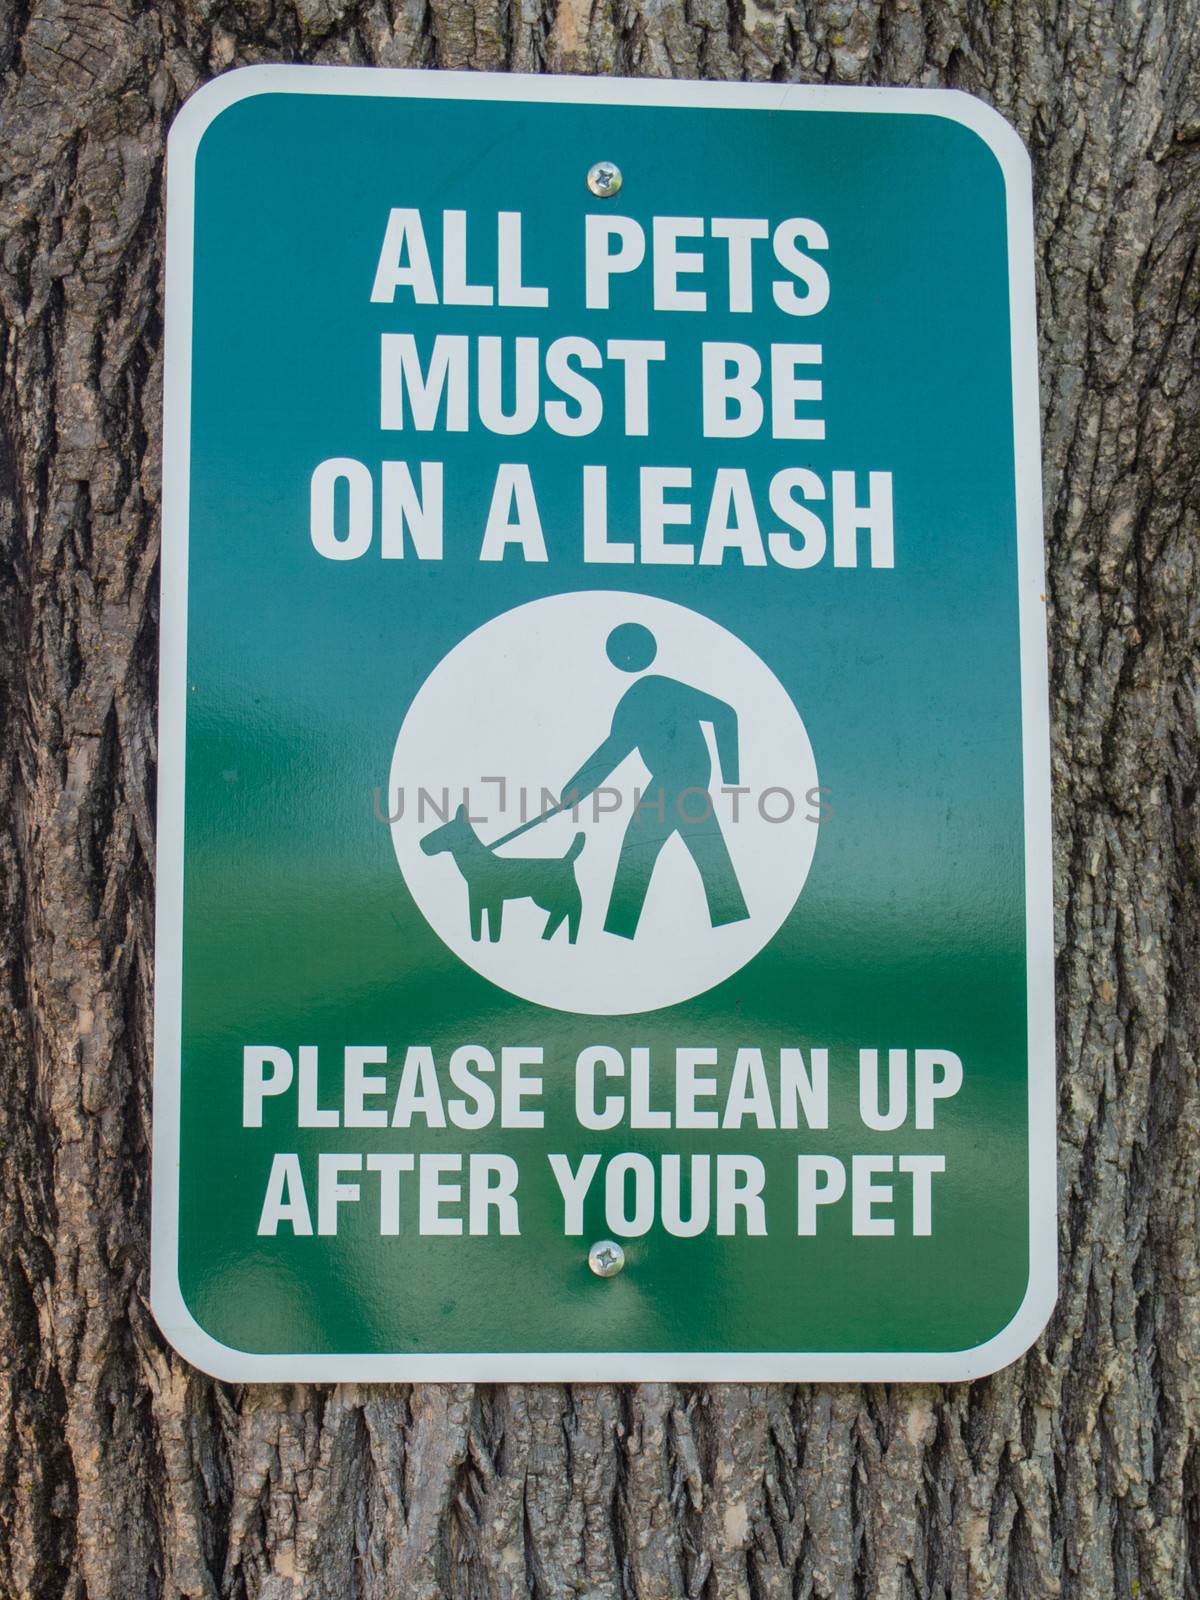 All Pets Must Be On A Leash  by melastmohican